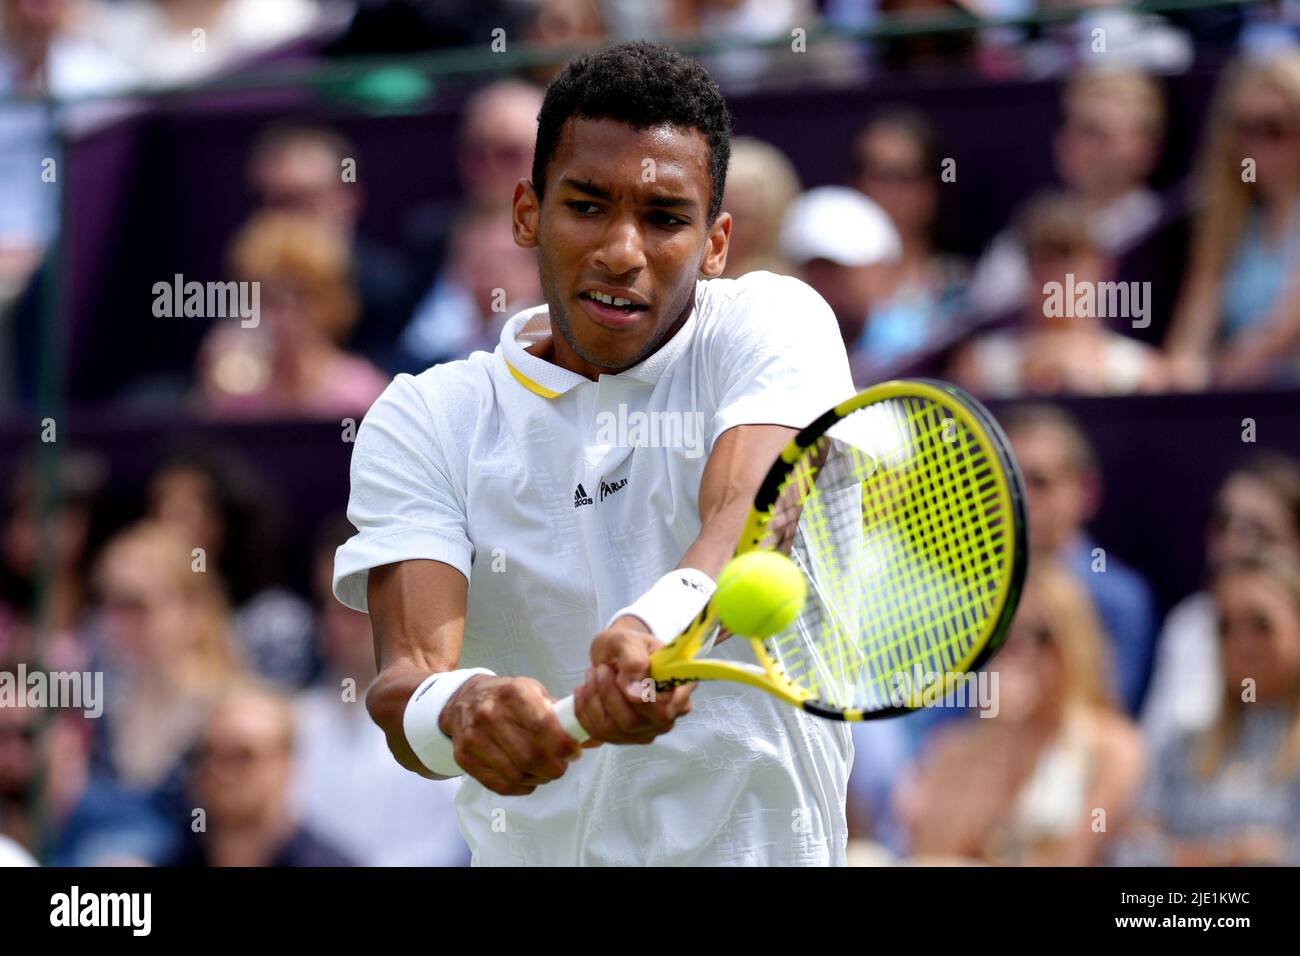 Felix Auger Aliassime during his match against Rafael Nadal on day four of the Giorgio Armani Tennis Classic at The Hurlingham Club, London